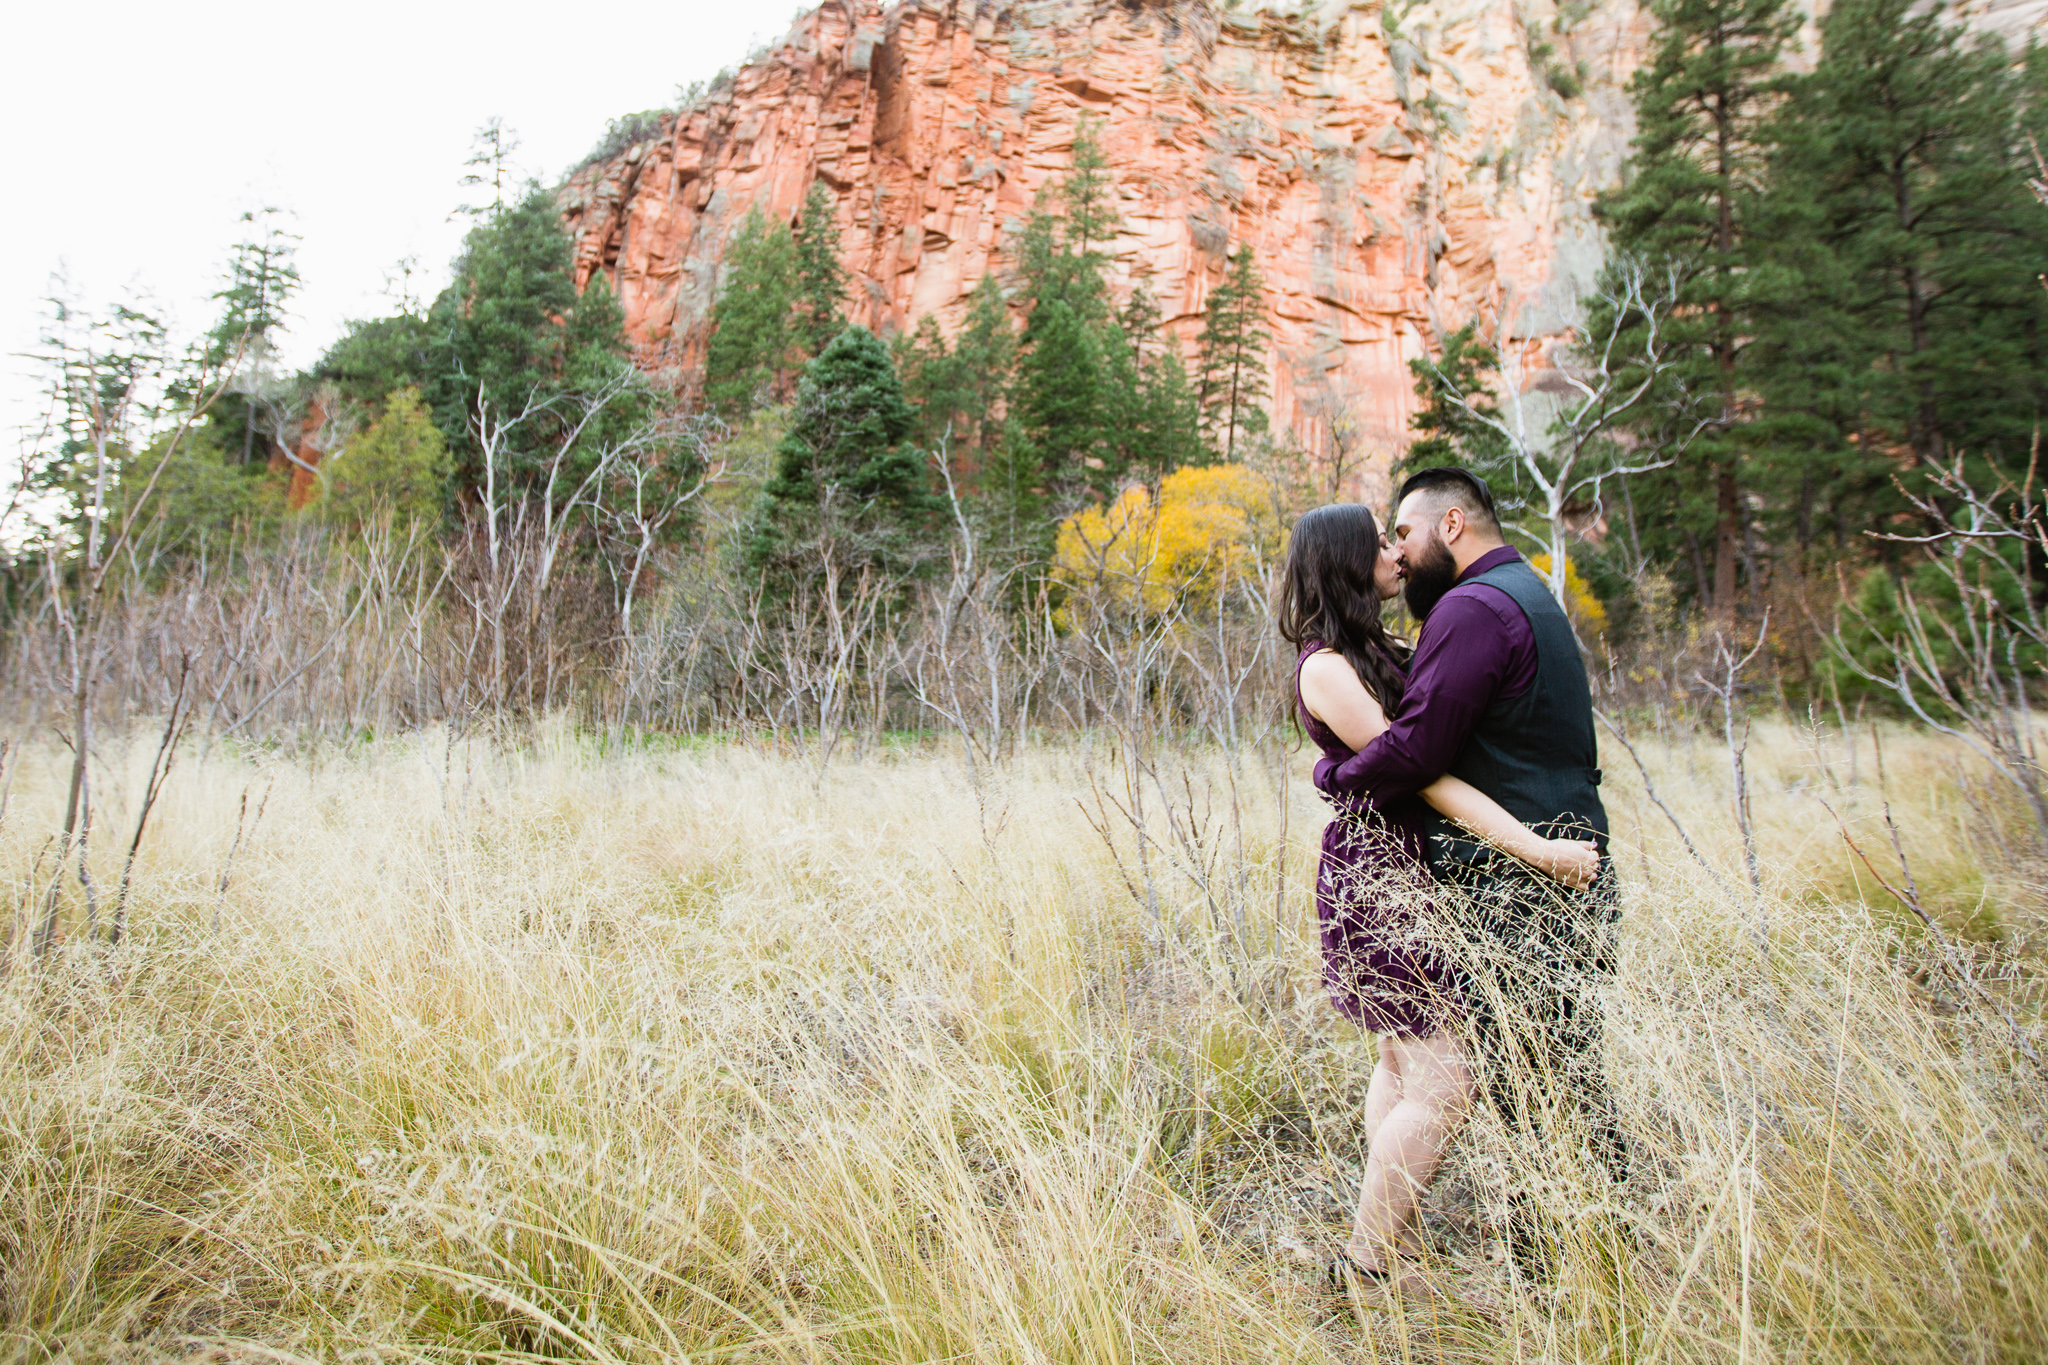 Couple Kissing at West Fork Oak Creek Trail in Sedona Arizona Outdoor Engagement Session Locations